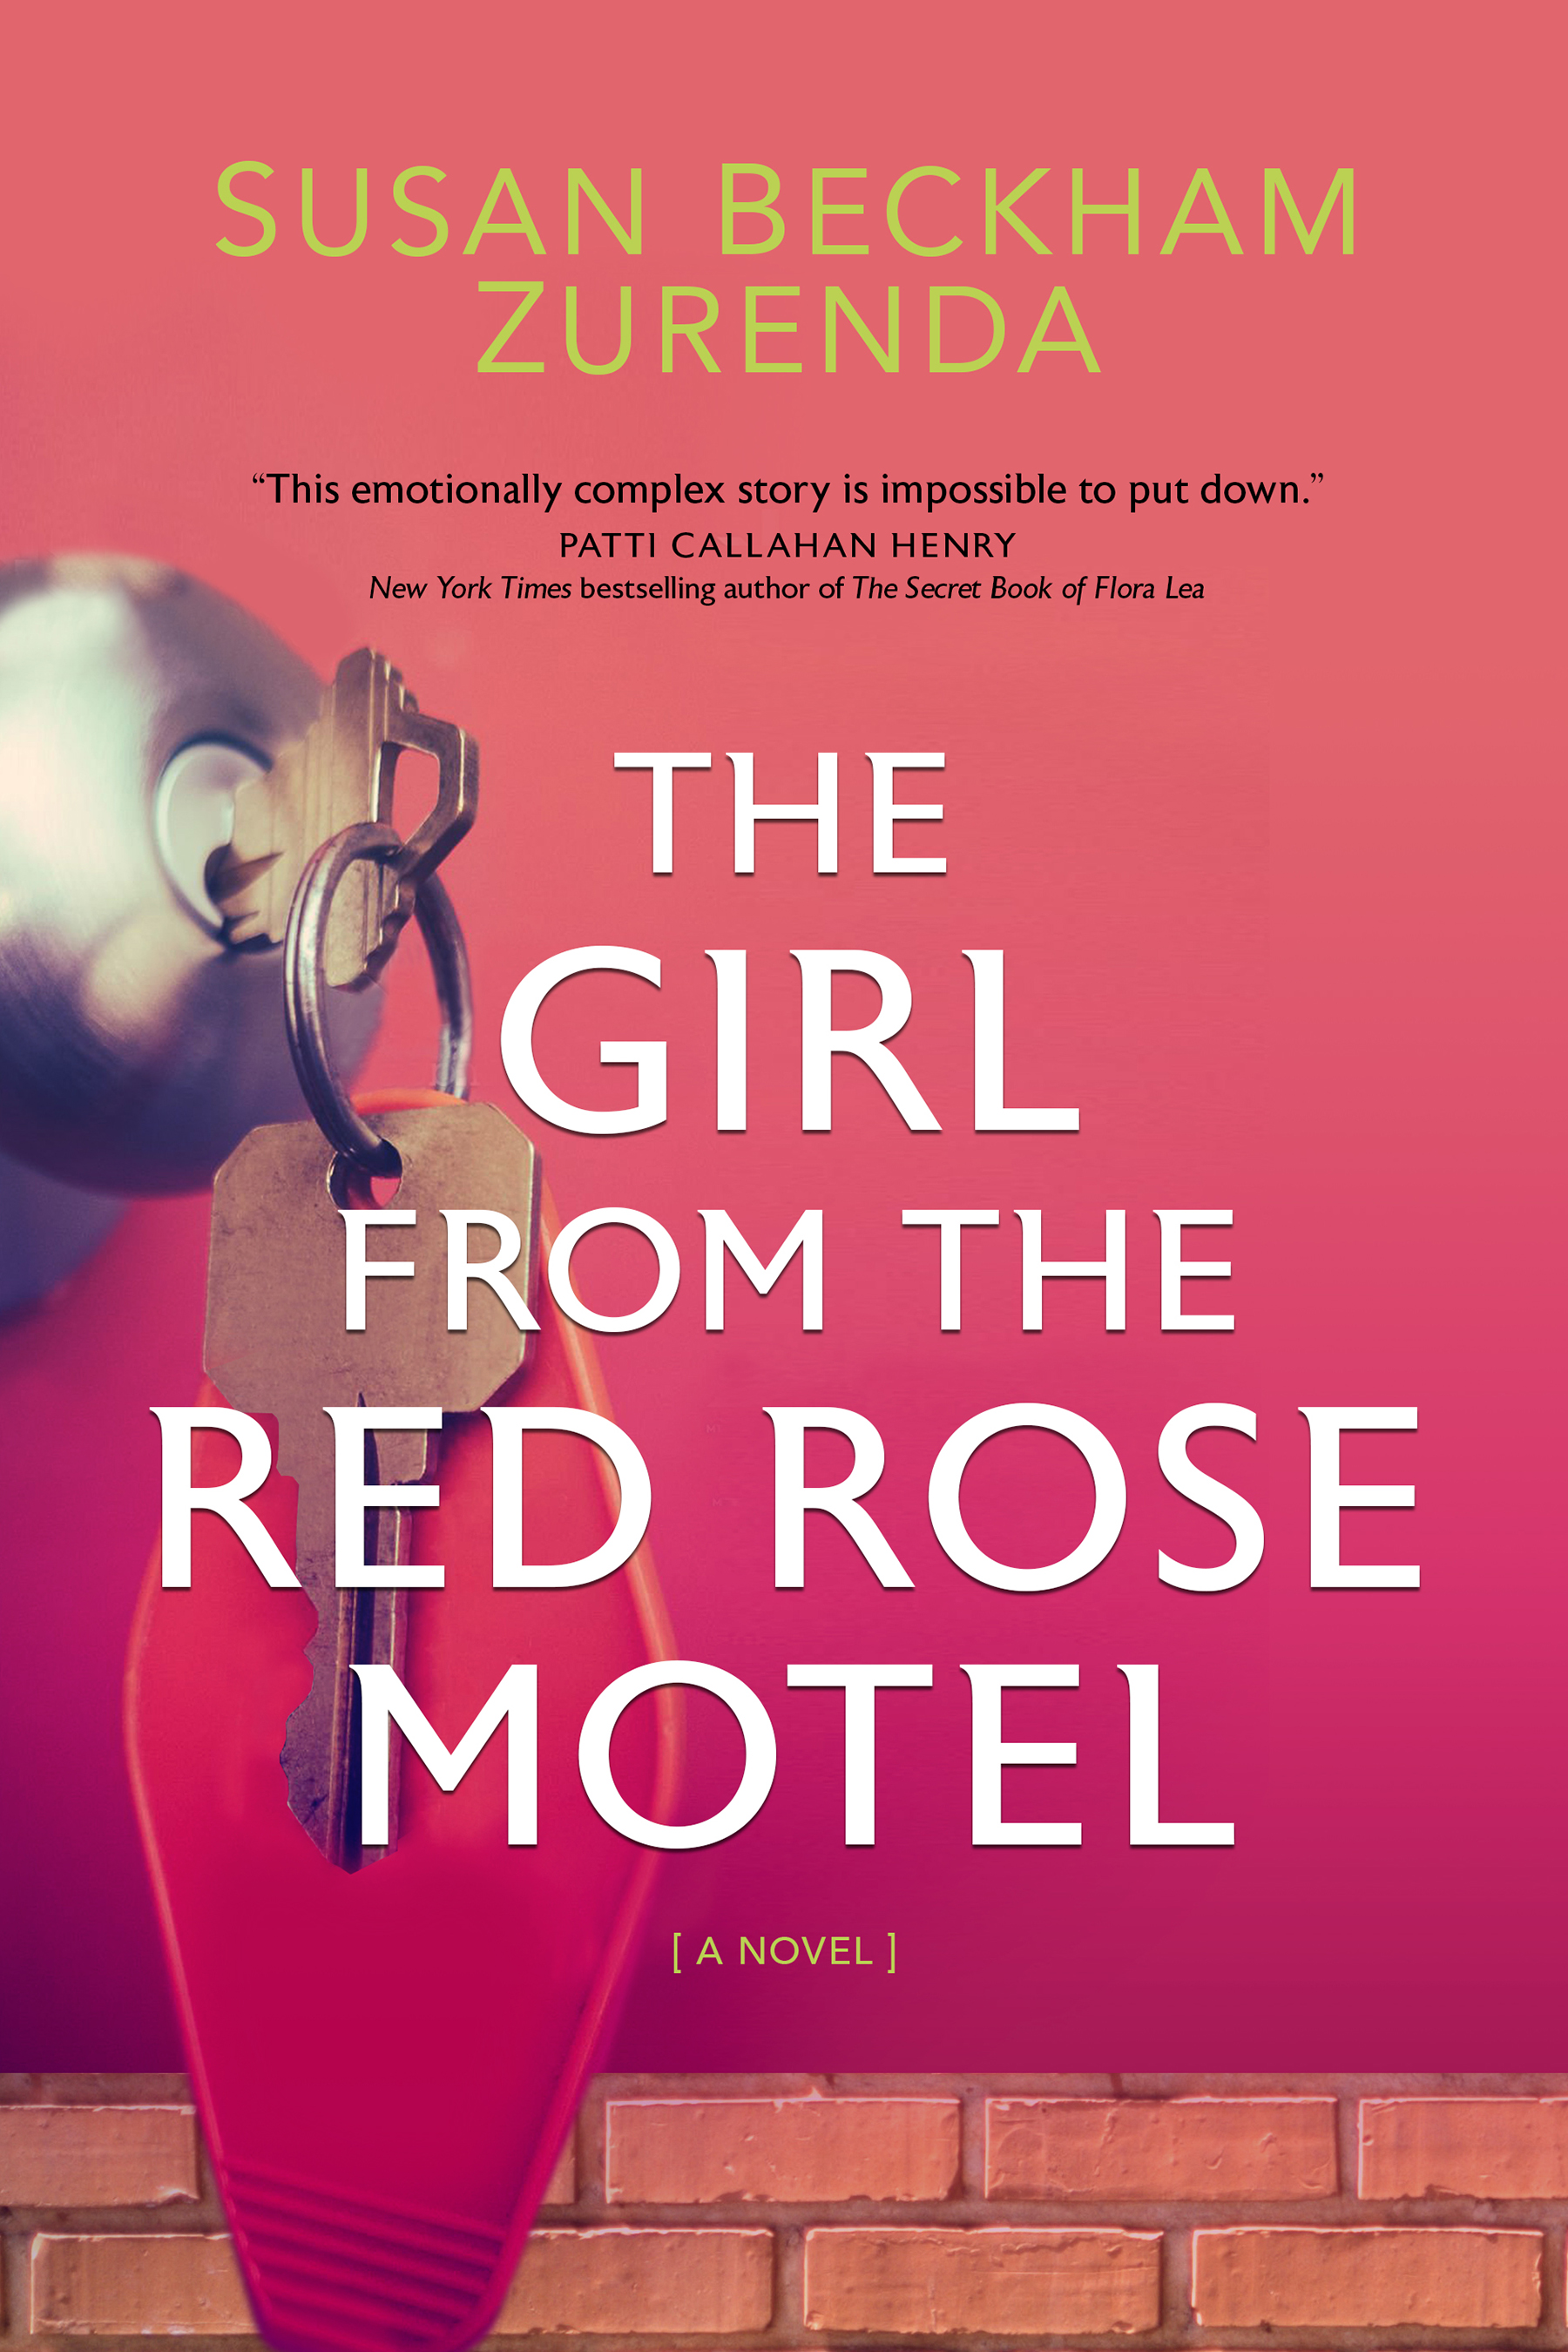 The Girl from the Red Rose Motel by Susan Zurenda